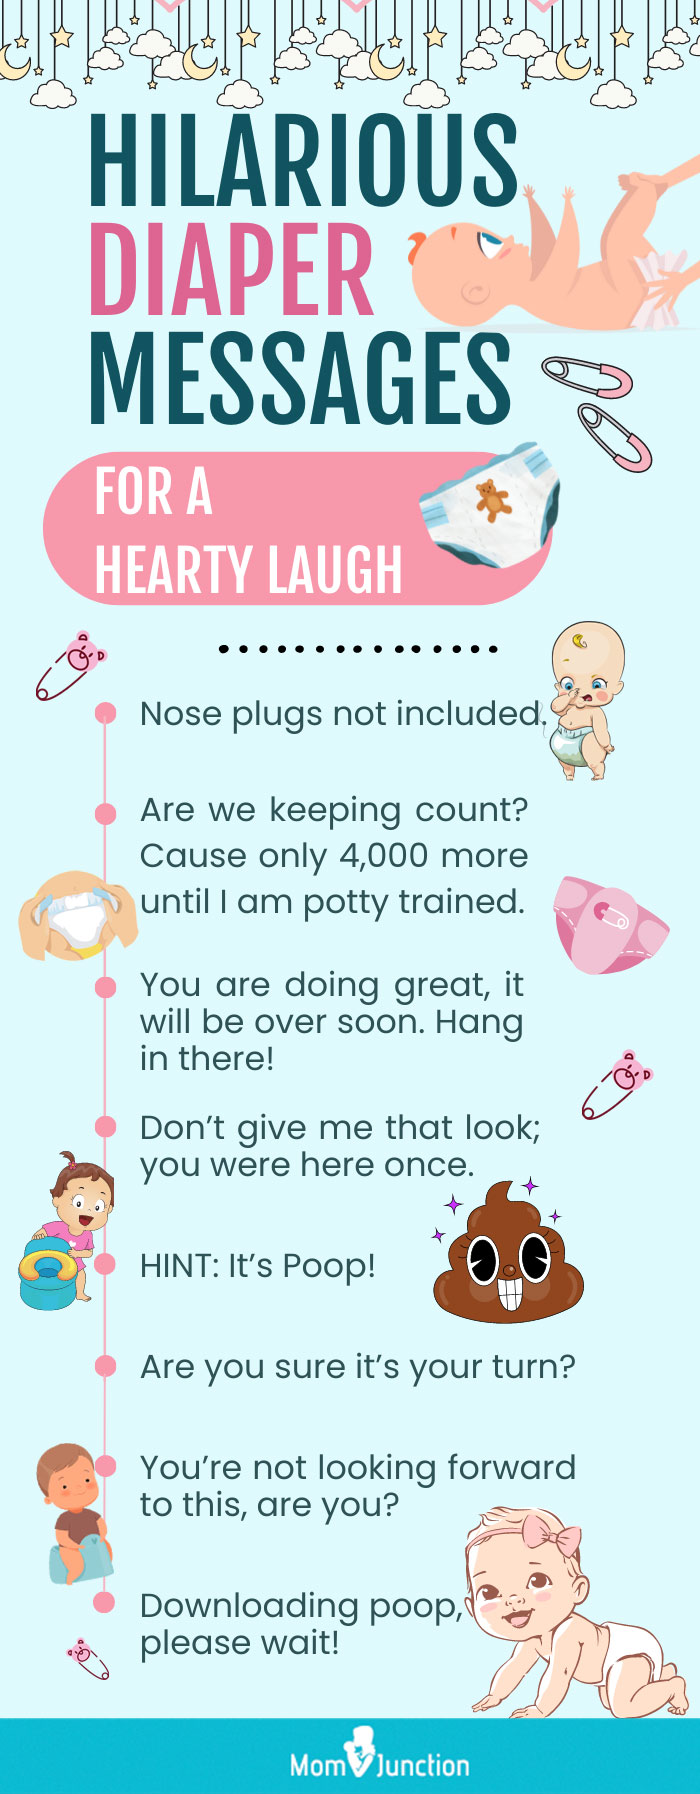 hilarious diaper messages for a hearty laugh (infographic)